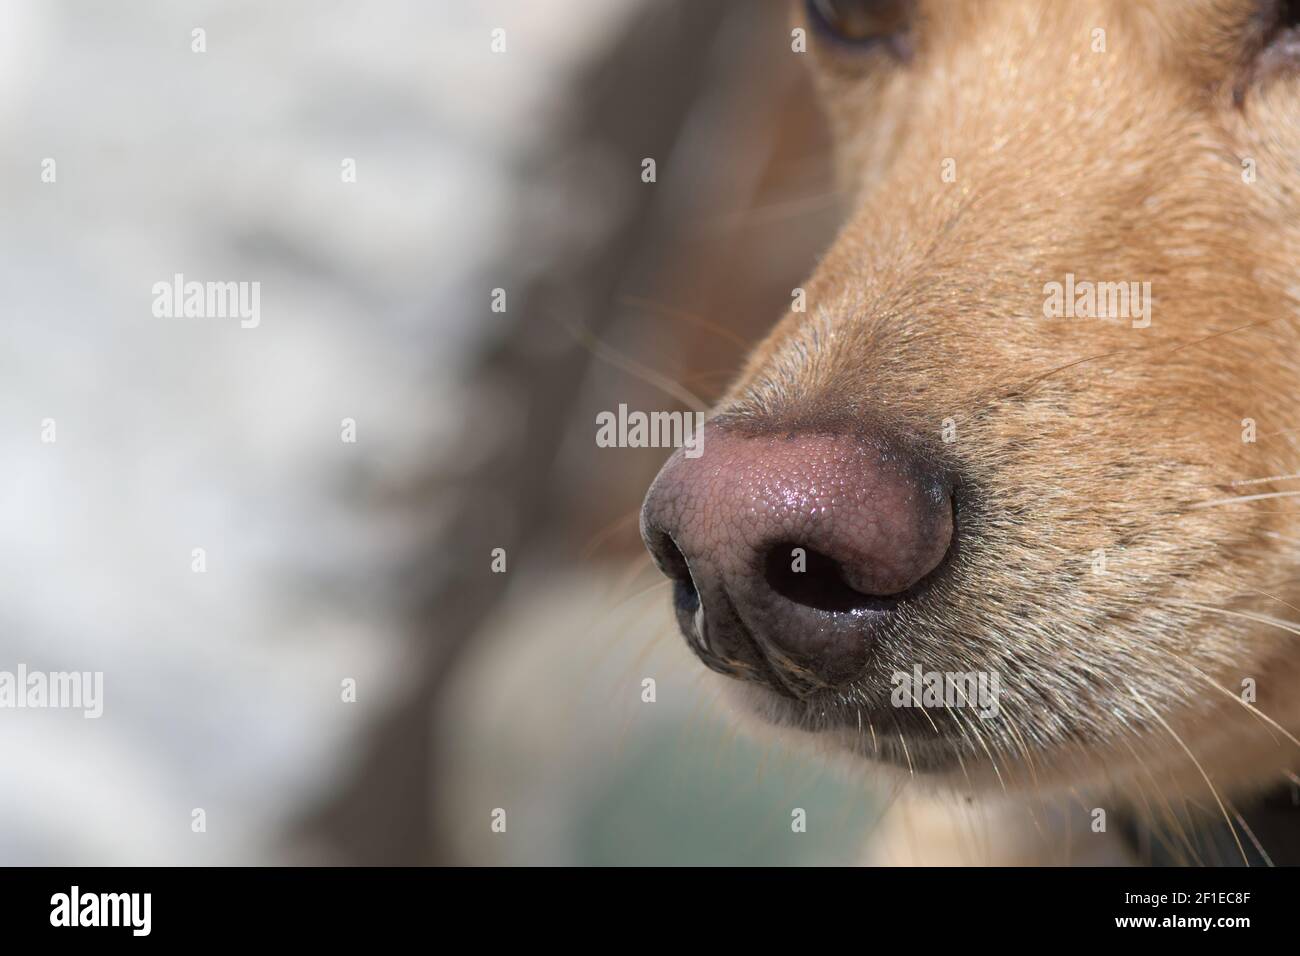 Close-up of light brown dog's nose and snout. Dog training, detection dog or sniffer dog, senses and smell concepts. Stock Photo